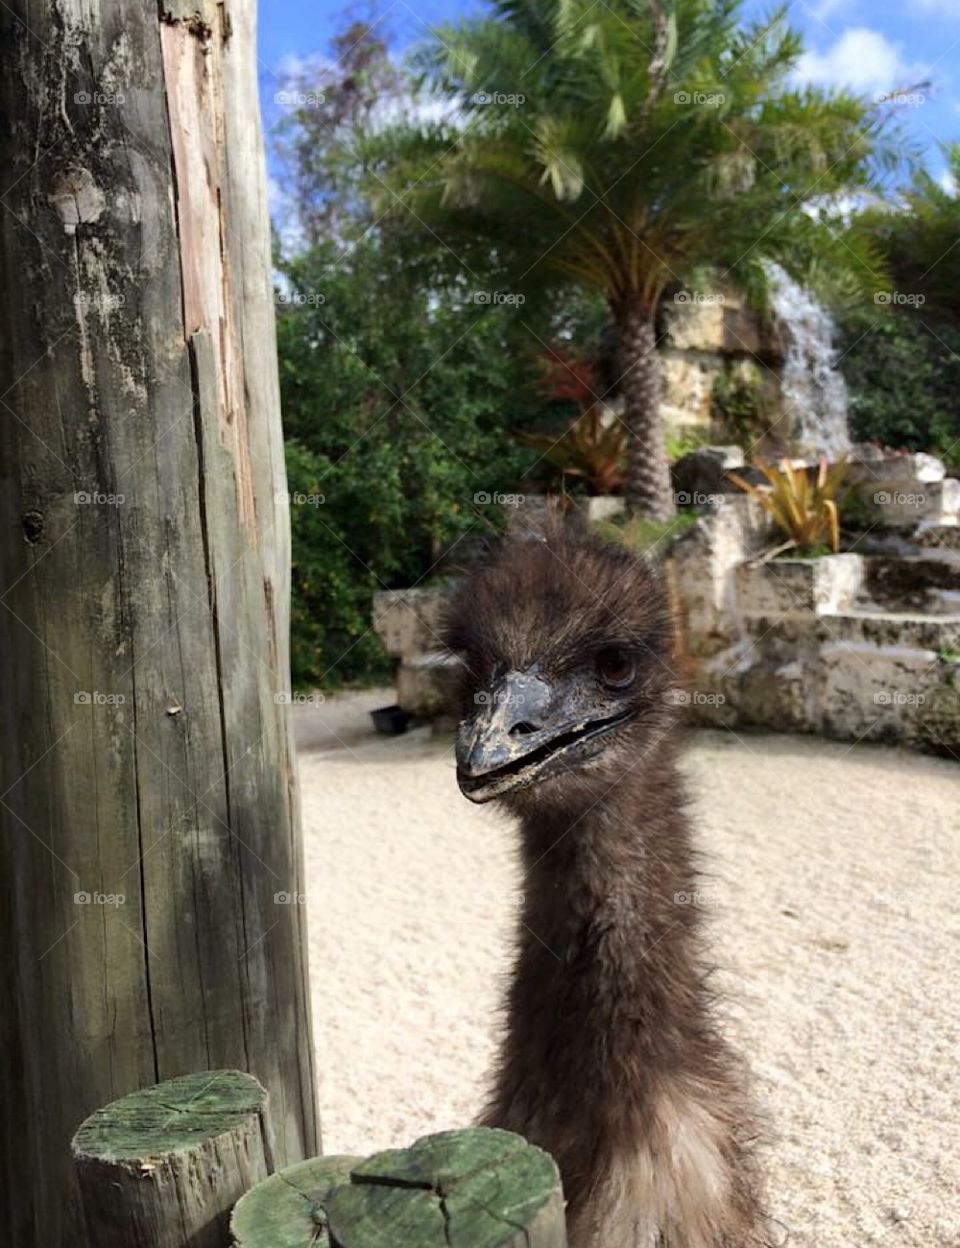 Emu, is you, that’s who? At Gator Farm in Homestead, FL.